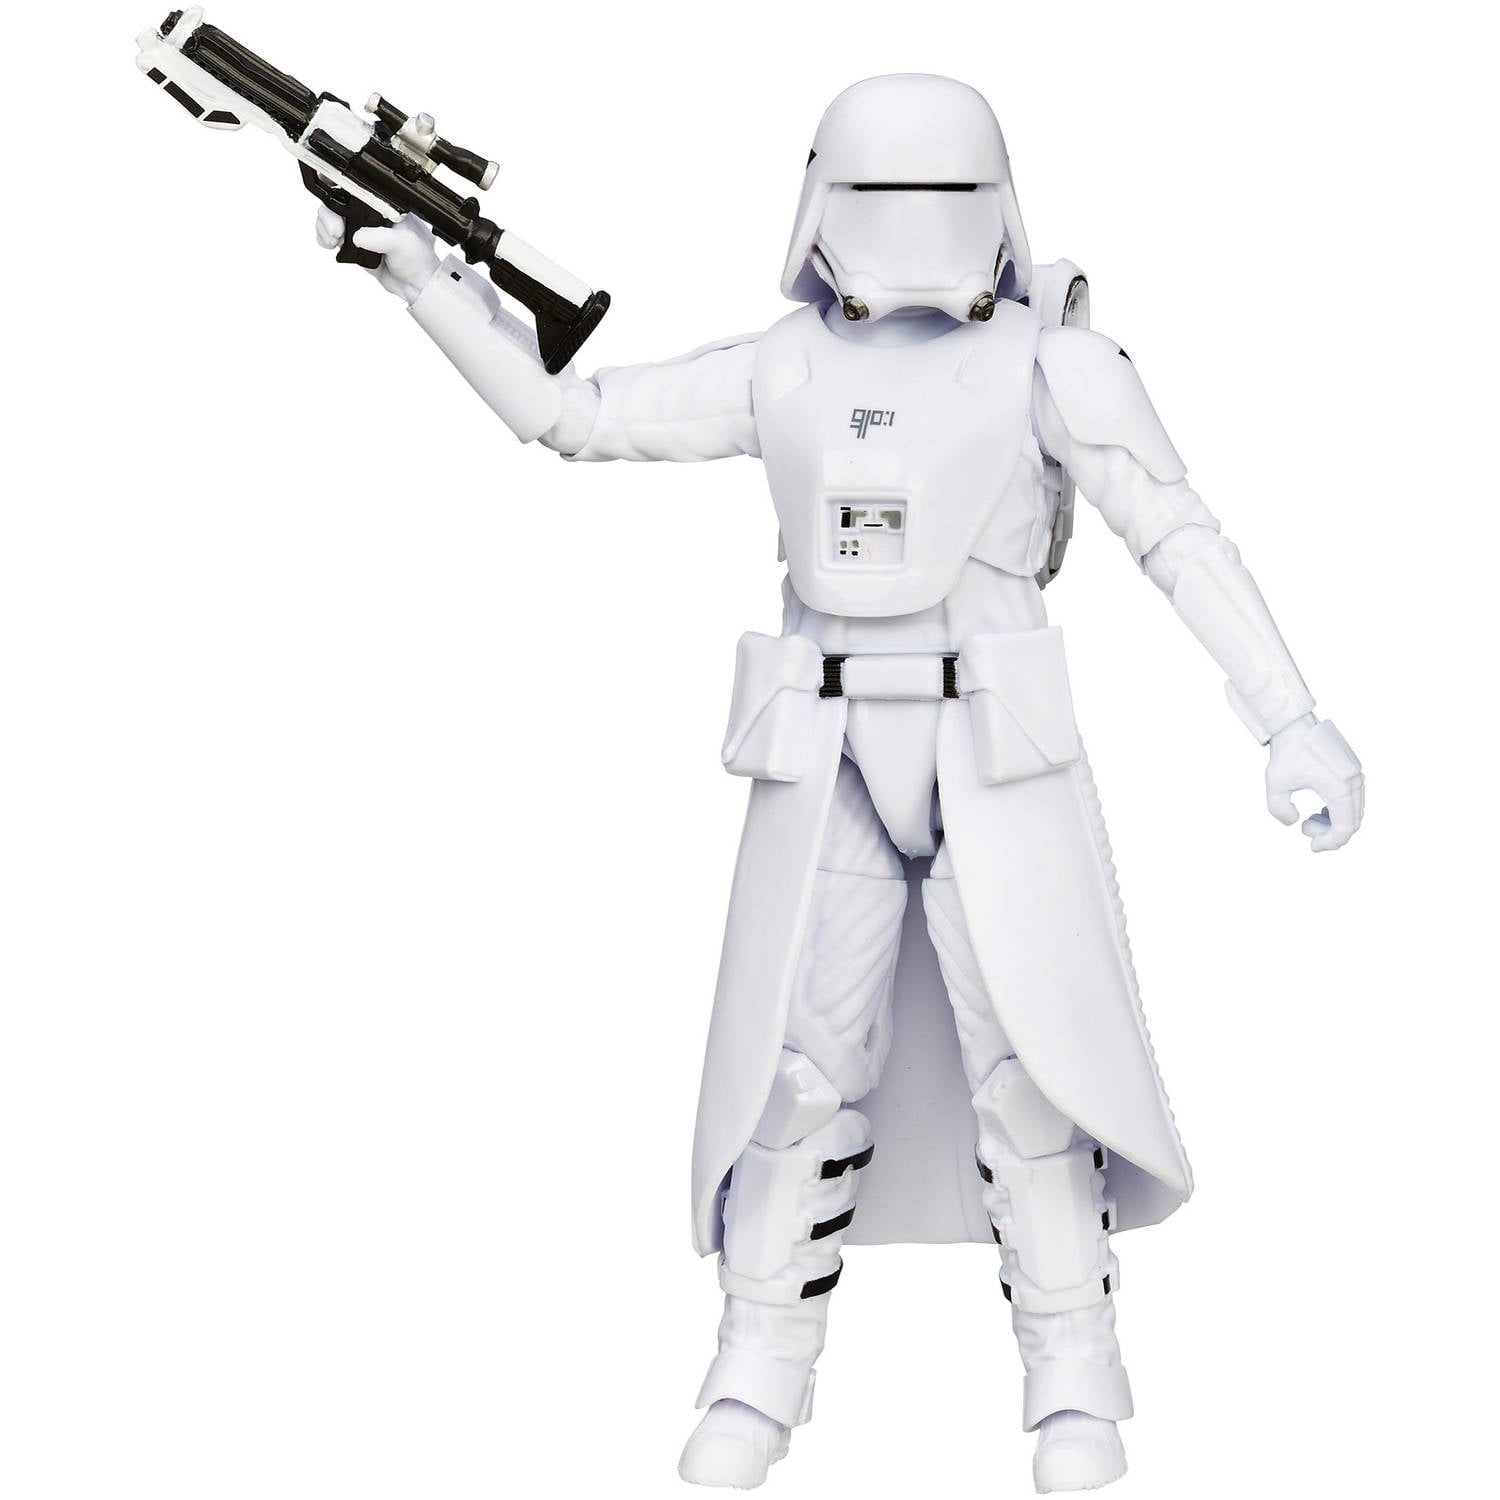 First Order Snowtrooper Officer STAR WARS The Black Series 6" TRU Exclusive 